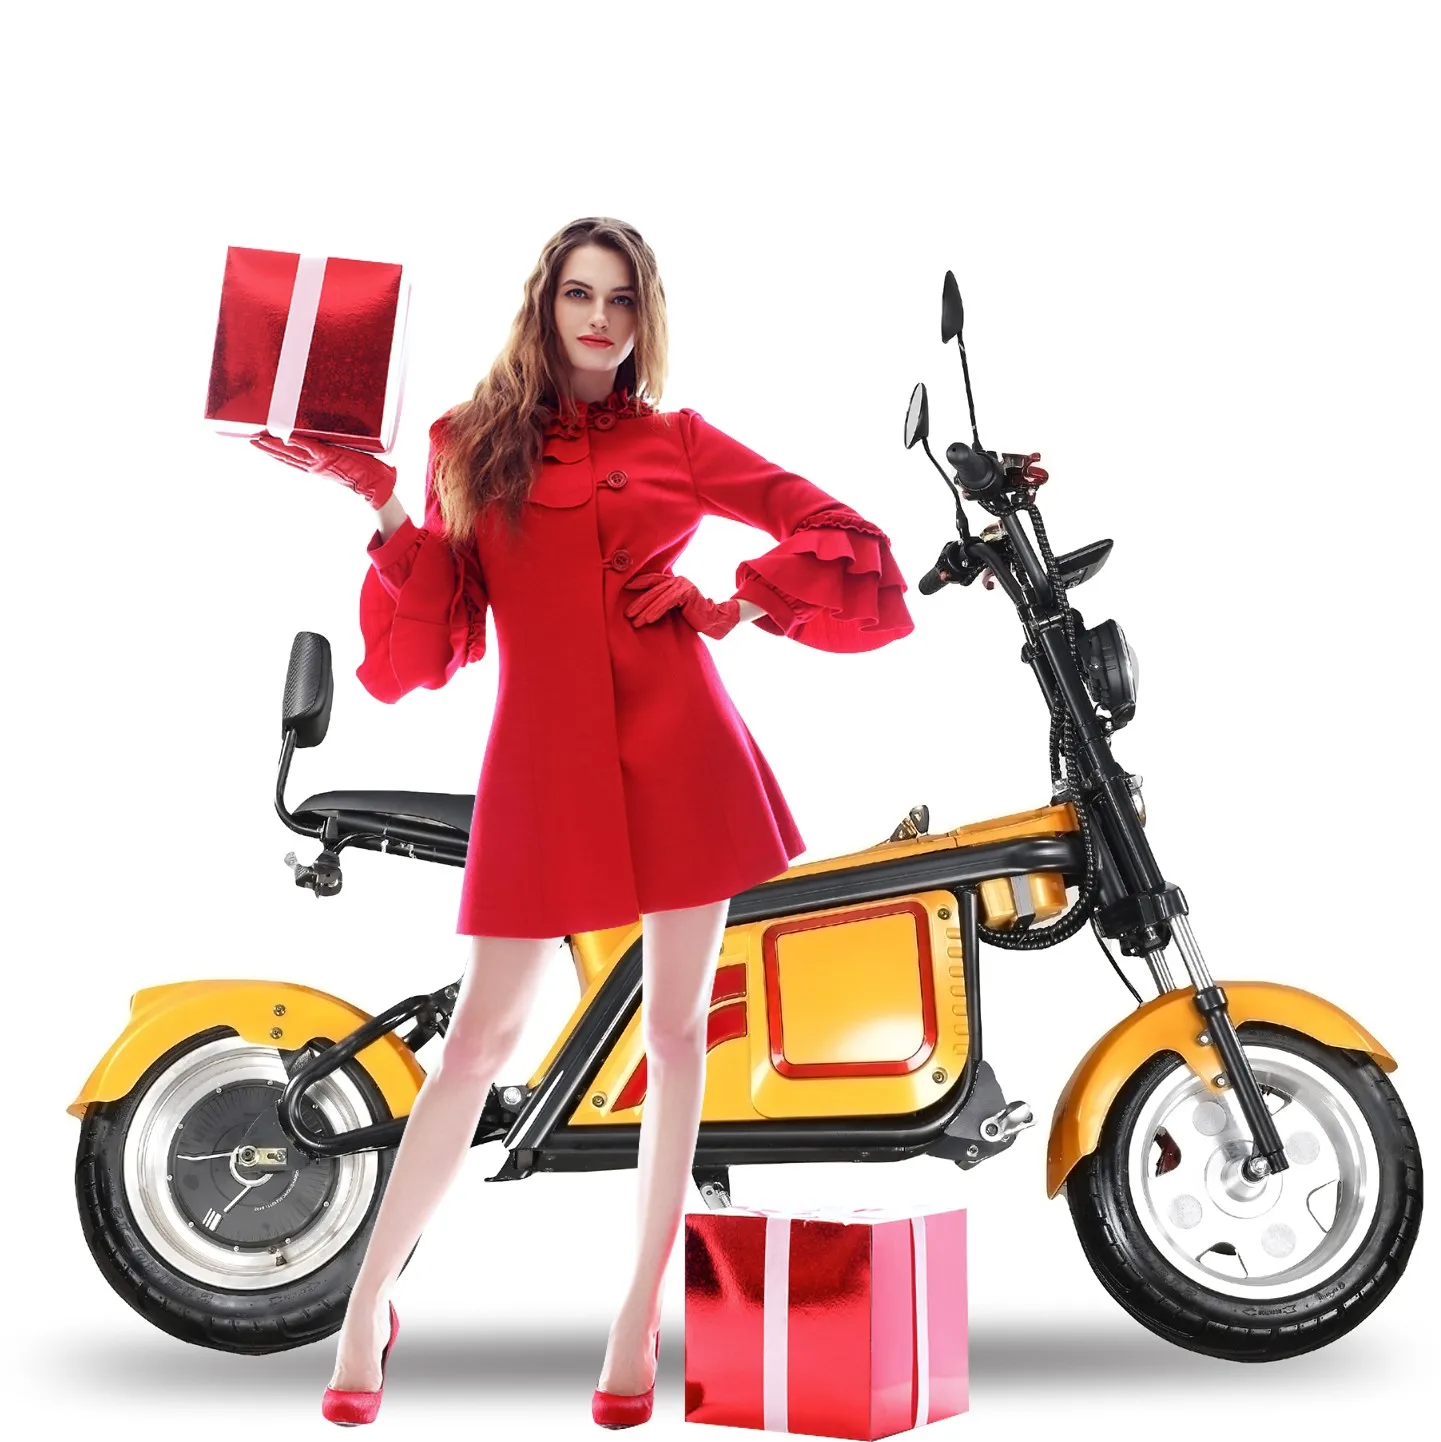 

Holland Warehouse European Warehouse Stock 1500w Electric Scooter City Coco Seev Citycoco, Fat Tire Adult Scooter Electric, Black